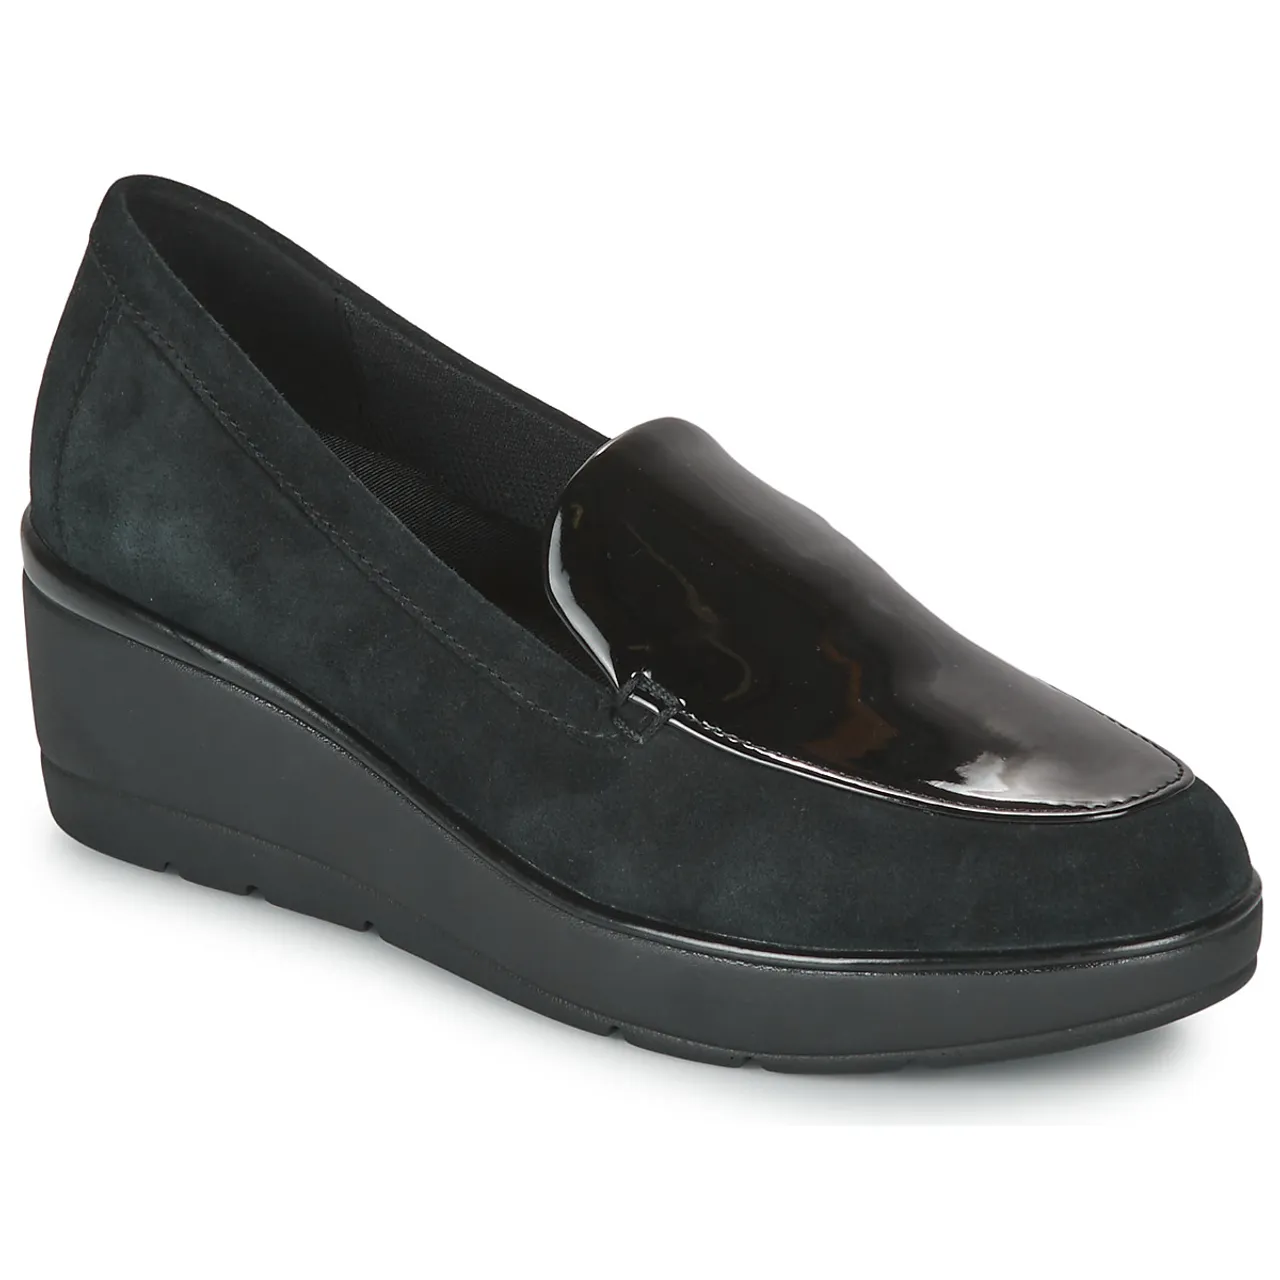 Geox  D ILDE  women's Loafers / Casual Shoes in Black